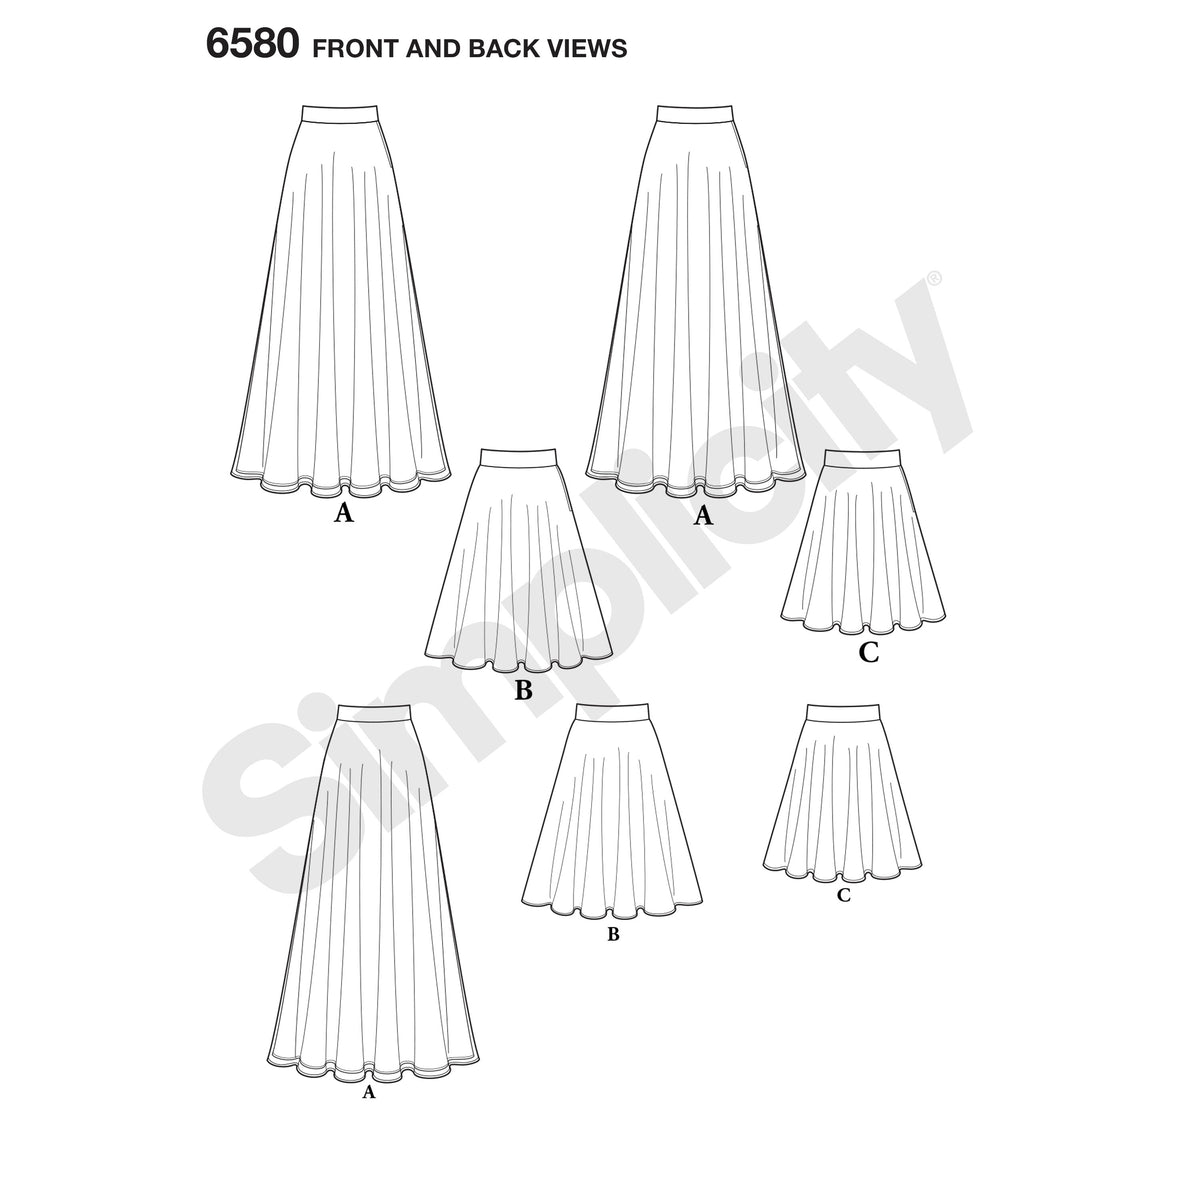 6580 New Look Pattern 6580 Misses' Circle Skirt